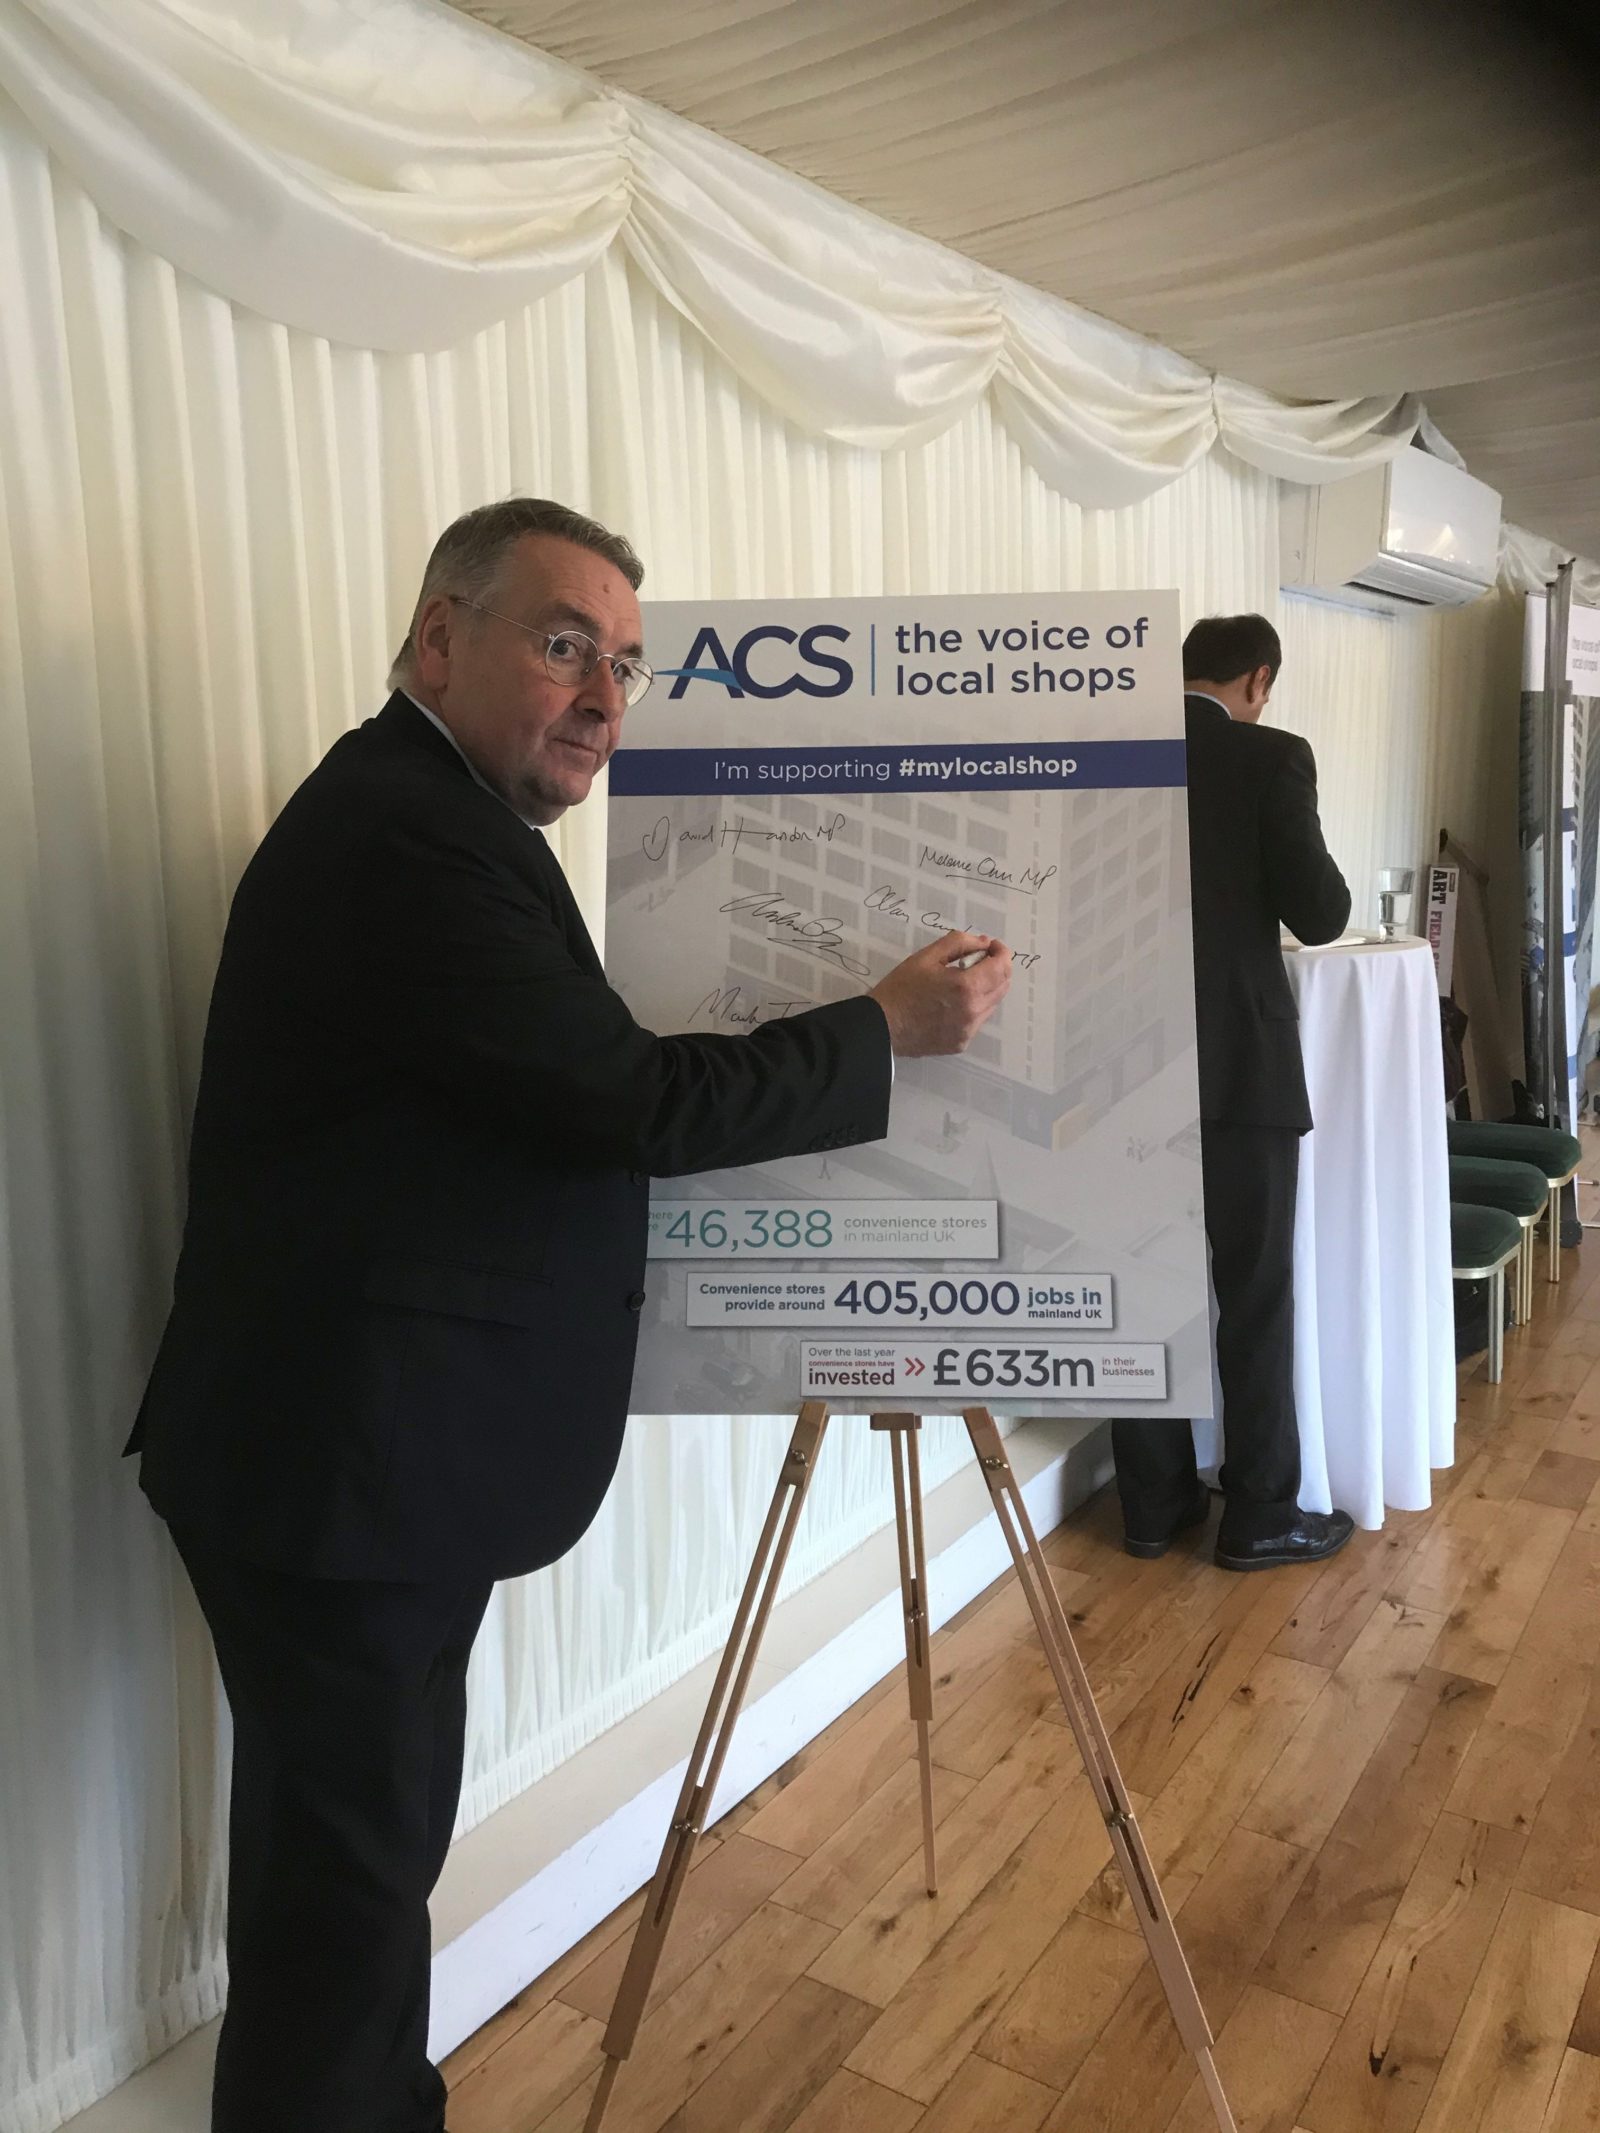 Alan supporting ACS